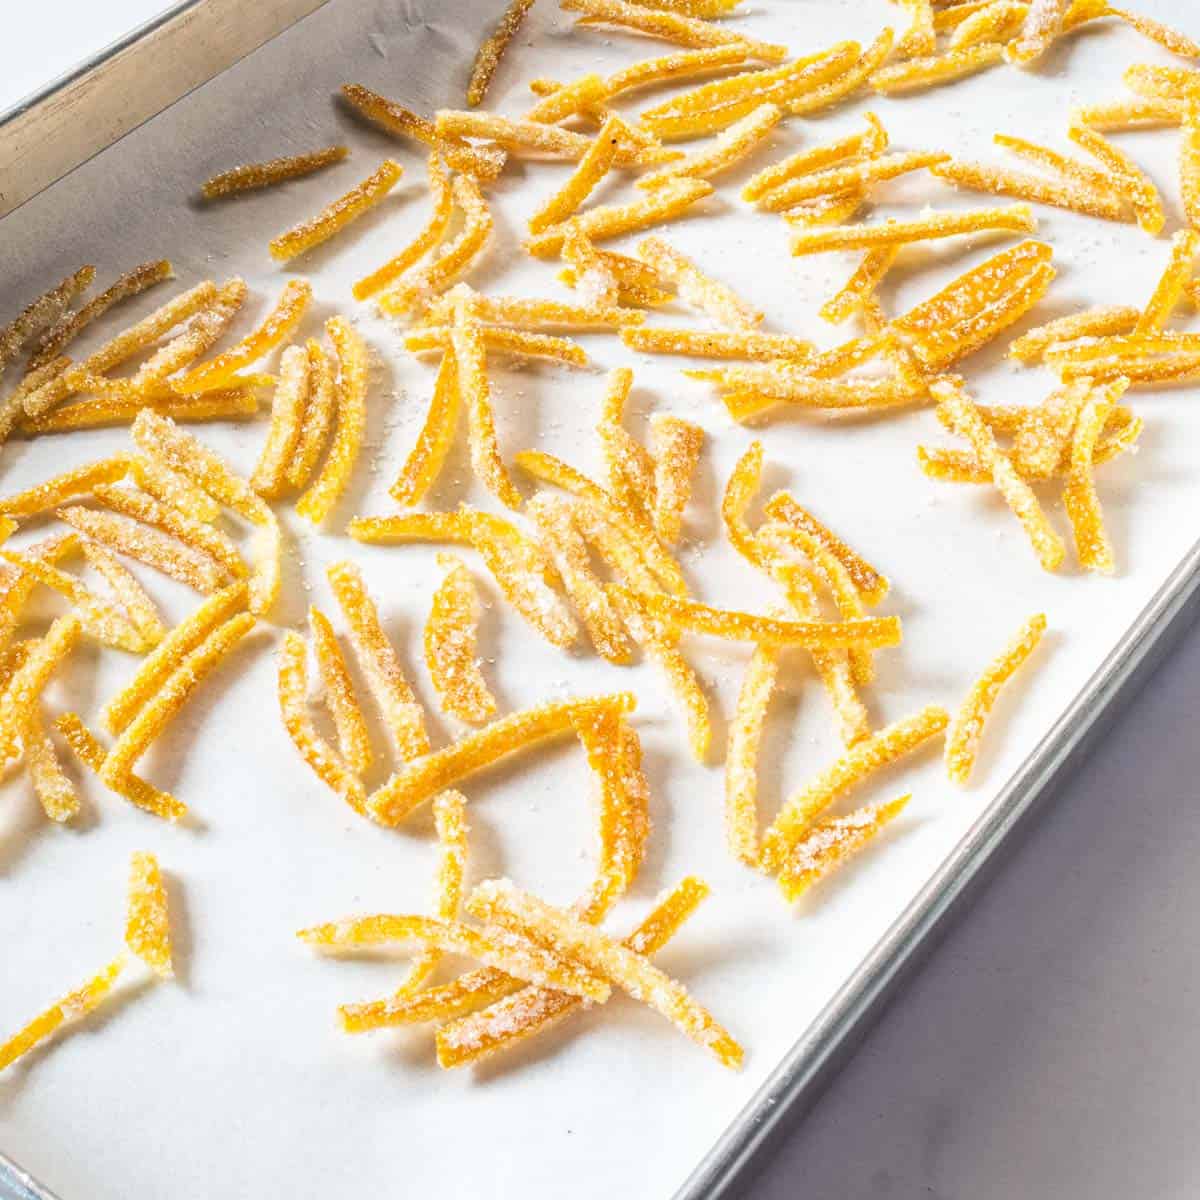 Orange peel candy on a parchment lined rectangle tray.